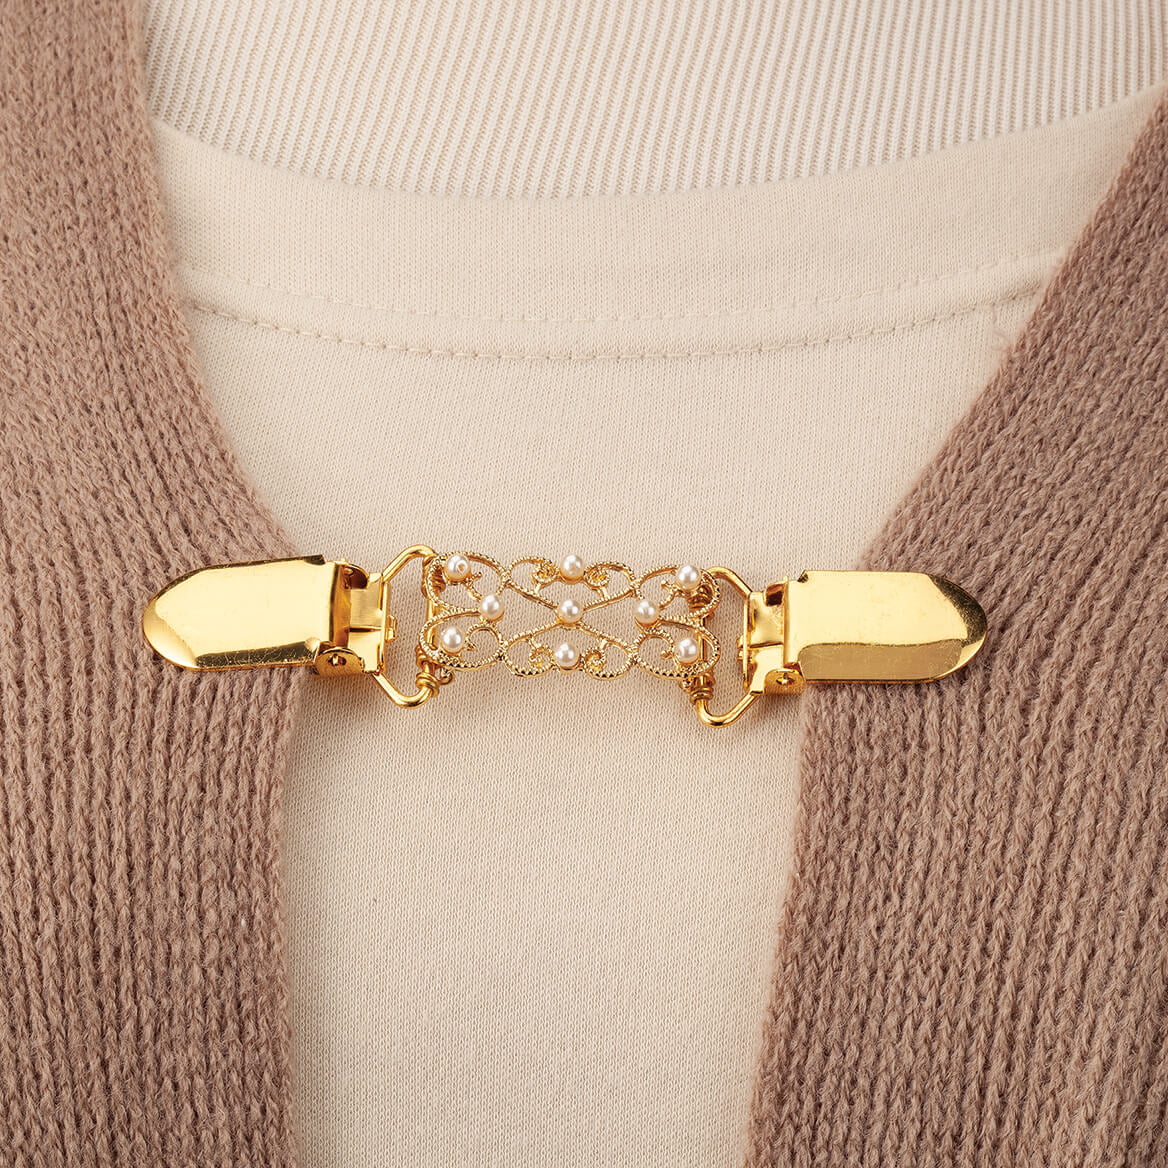 sweater clasp, sweater clasp Suppliers and Manufacturers at